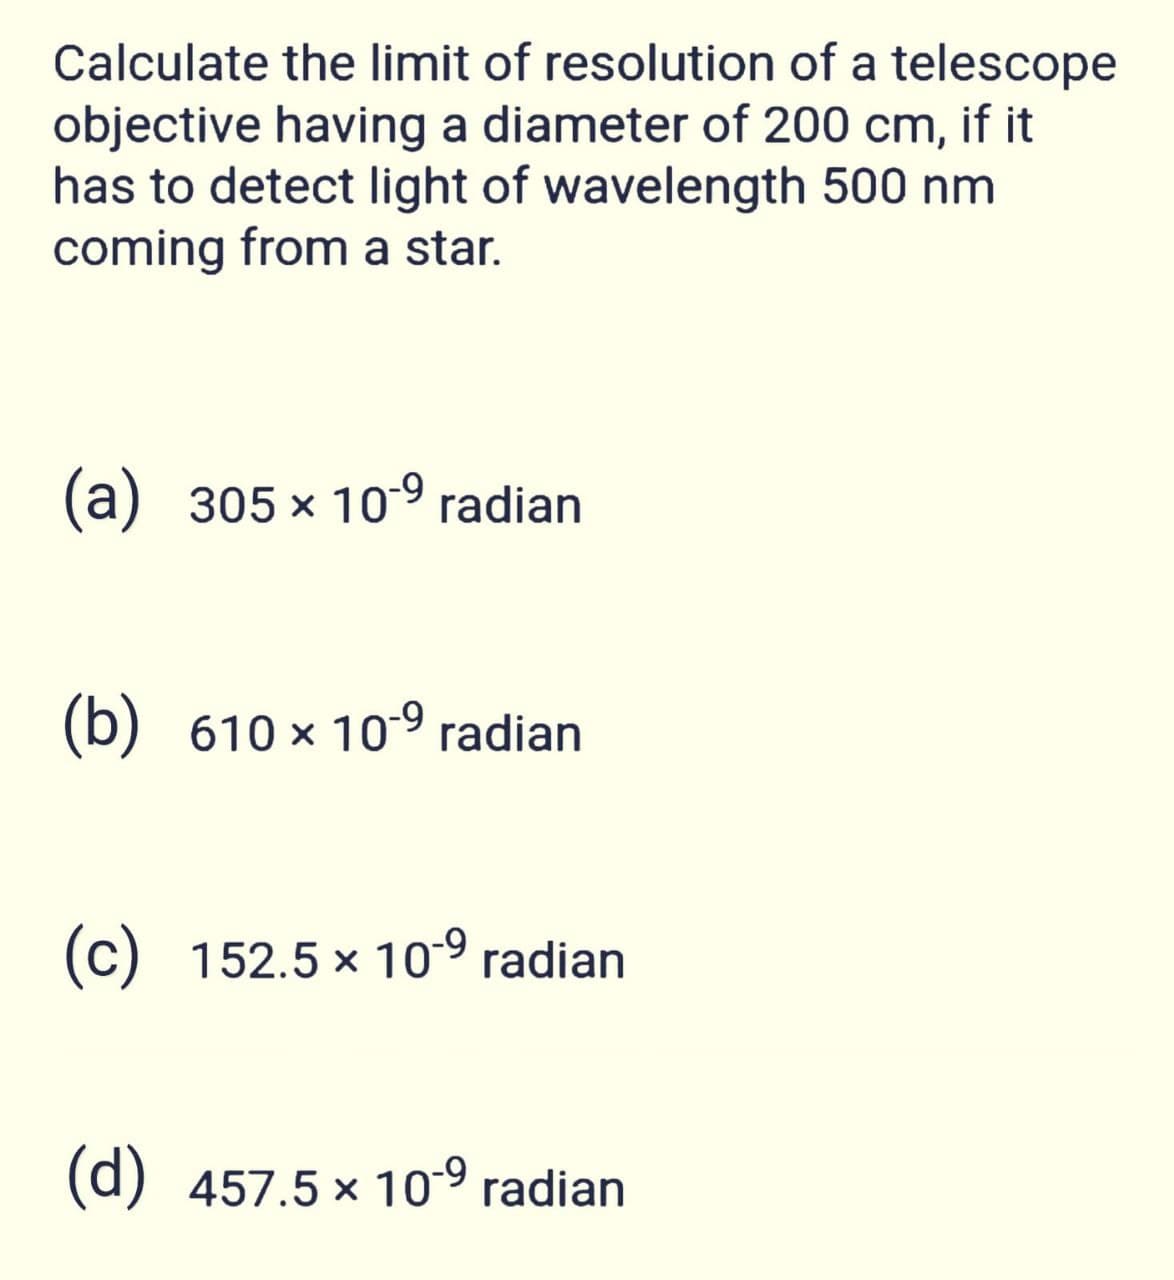 Calculate the limit of resolution of a telescope
objective having a diameter of 200 cm, if it
has to detect light of wavelength 500 nm
coming from a star.
(a) 305 x 10-9 radian
(b) 610 x 10-9 radian
(c) 152.5 x 109 radian
(d) 457.5 x 10-9 radian
